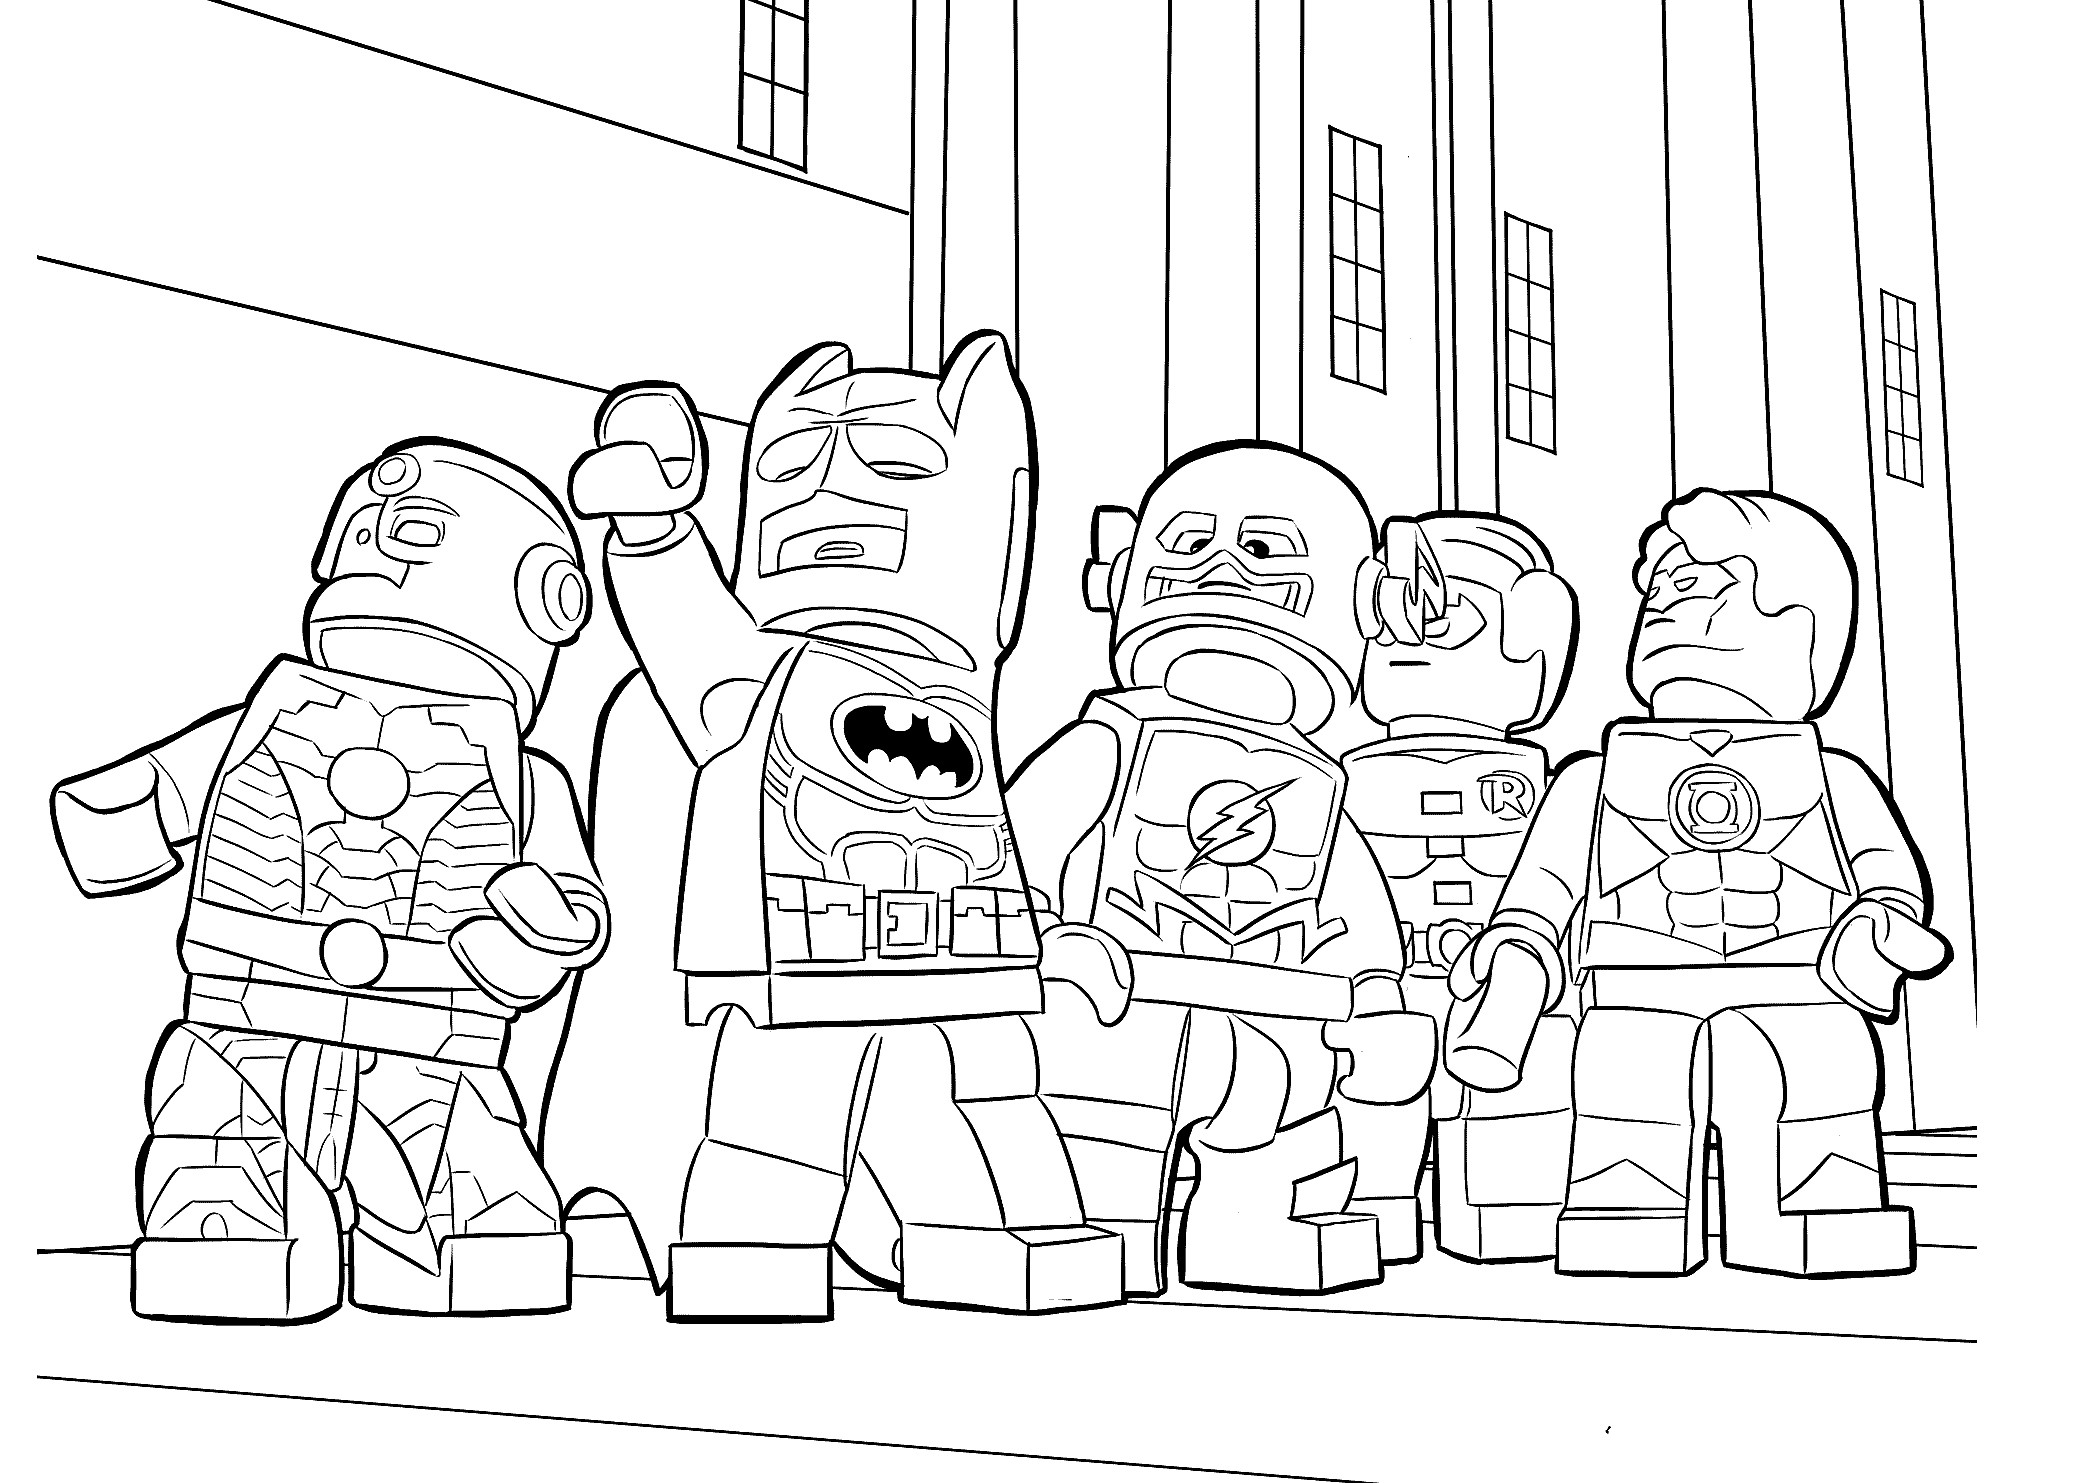 Free Print Coloring Pages For Boys
 Lego heroes coloring page for boys printable free Lego